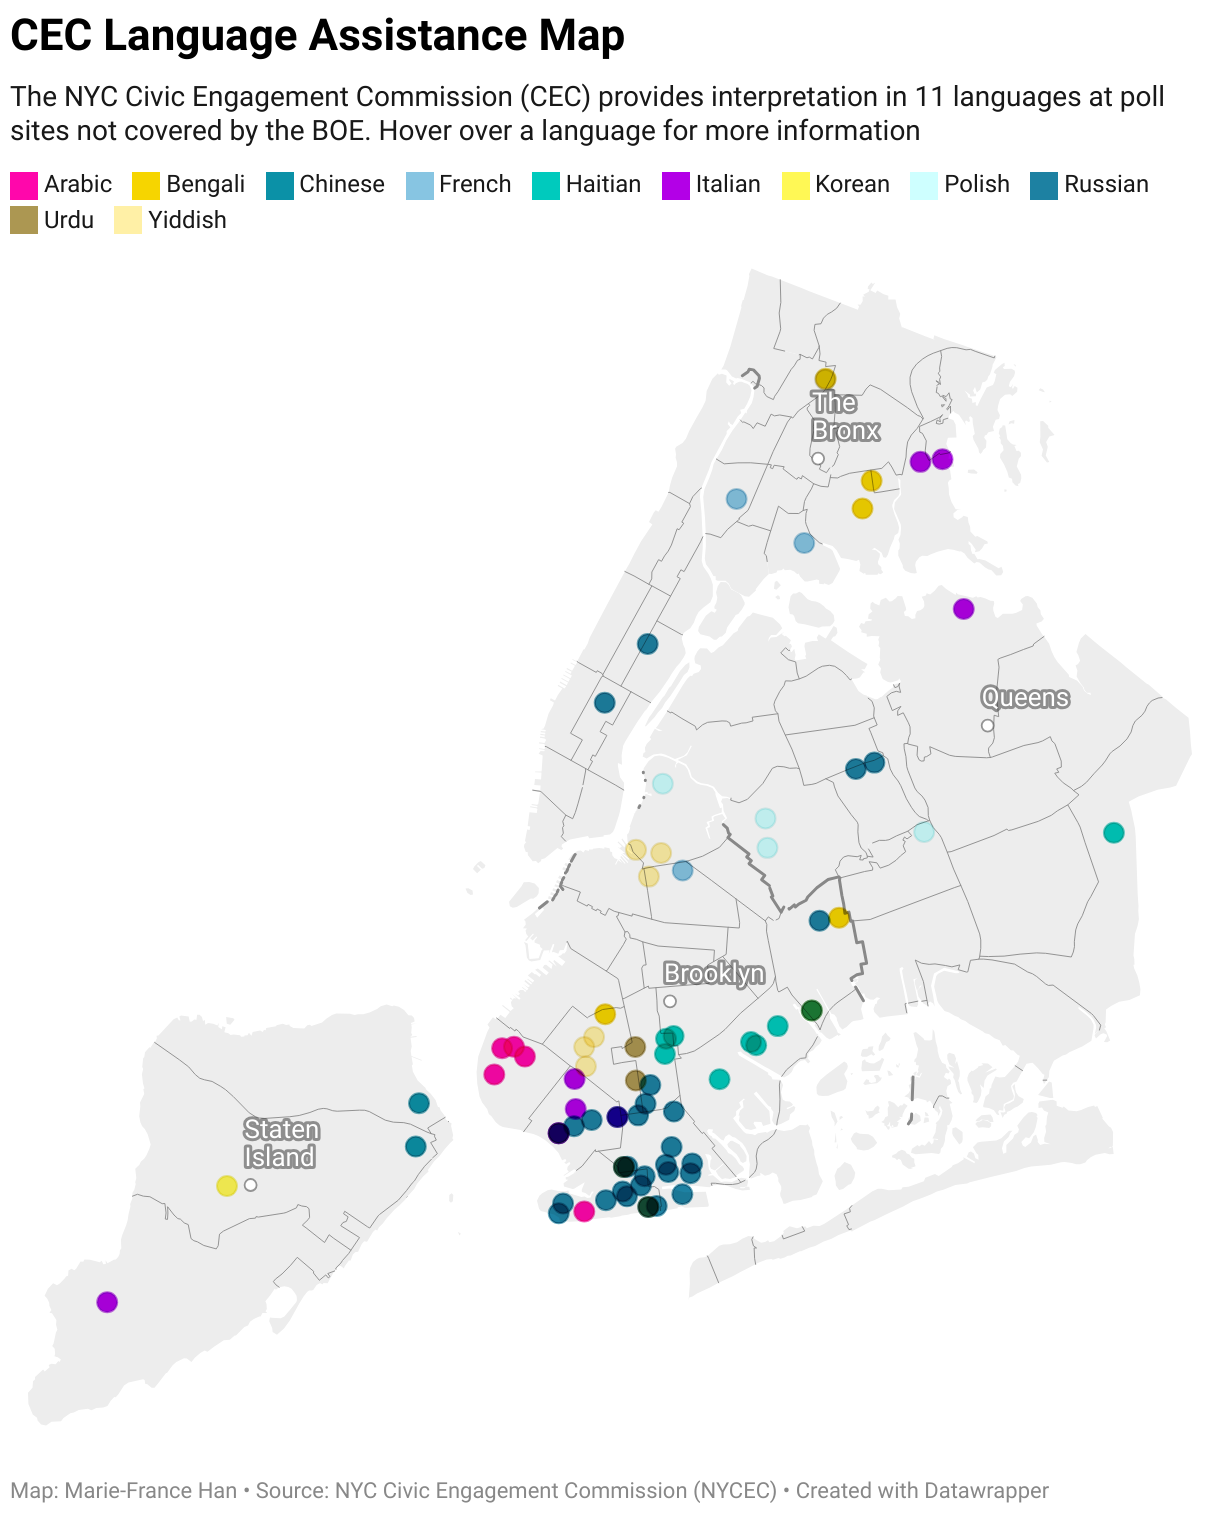 Map of NYC by community district showing color-coded poll sites offering language assistance